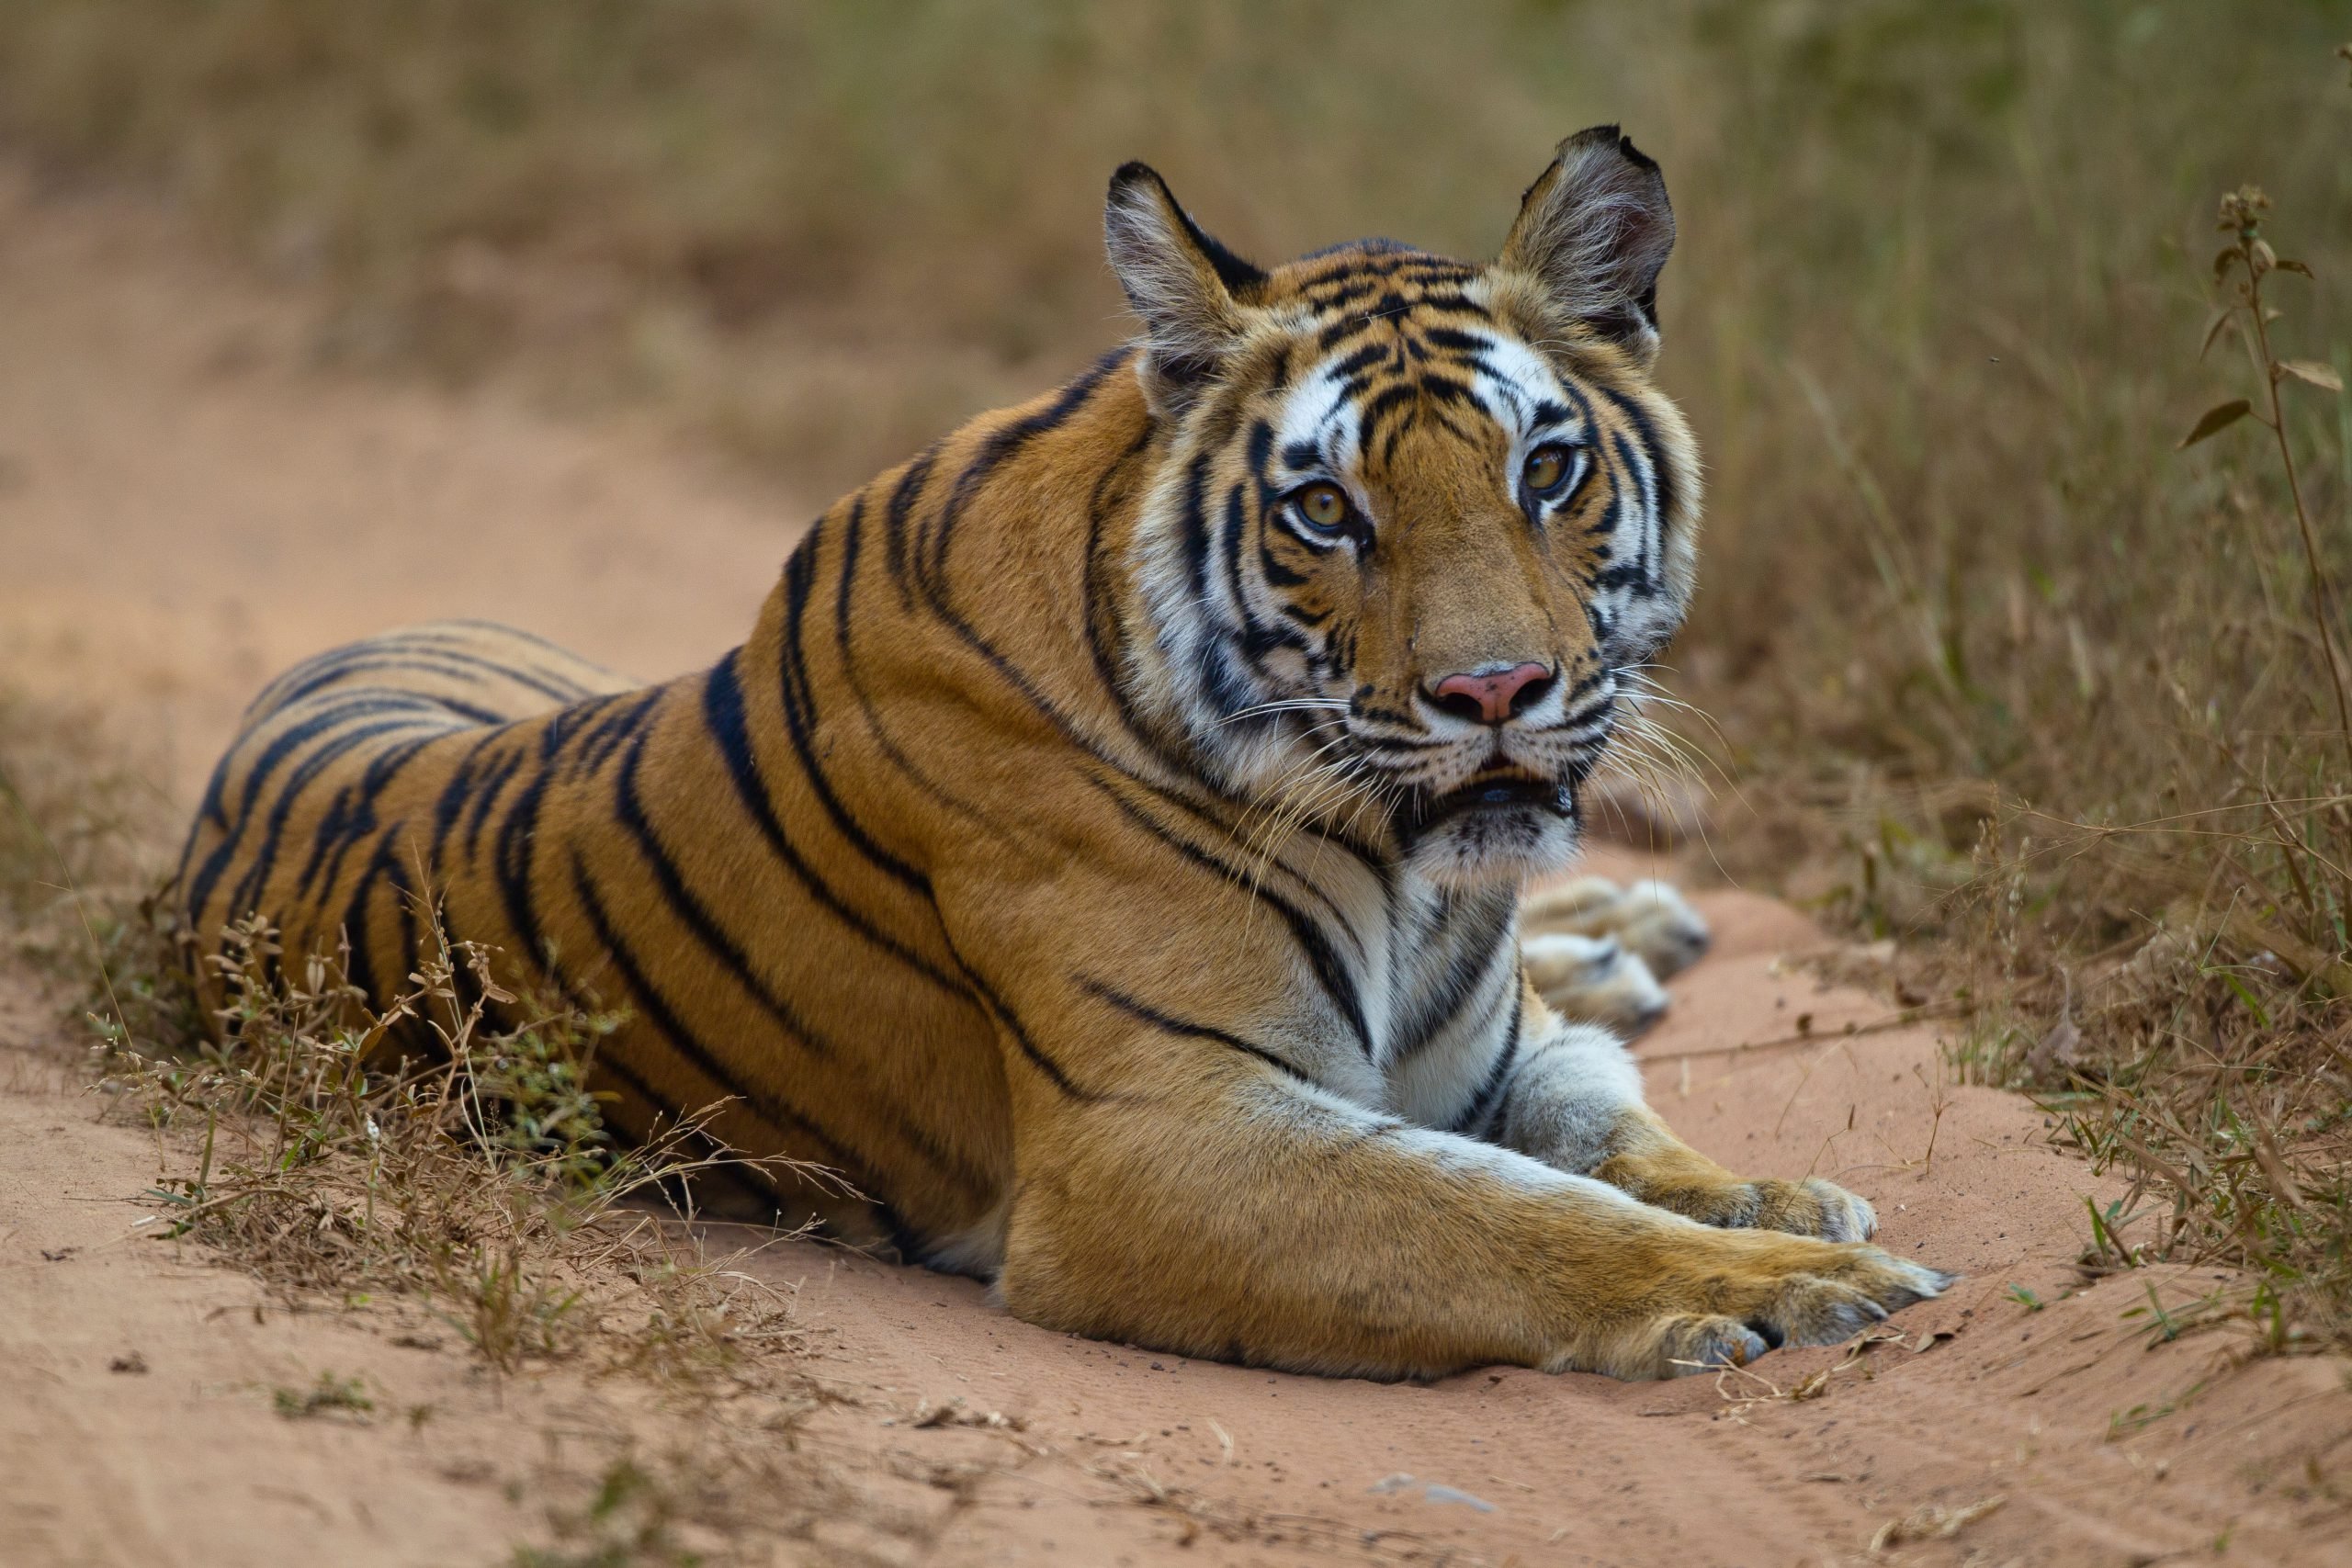 A wild Bengal tiger [Image by: Mark Smith/Alamy]